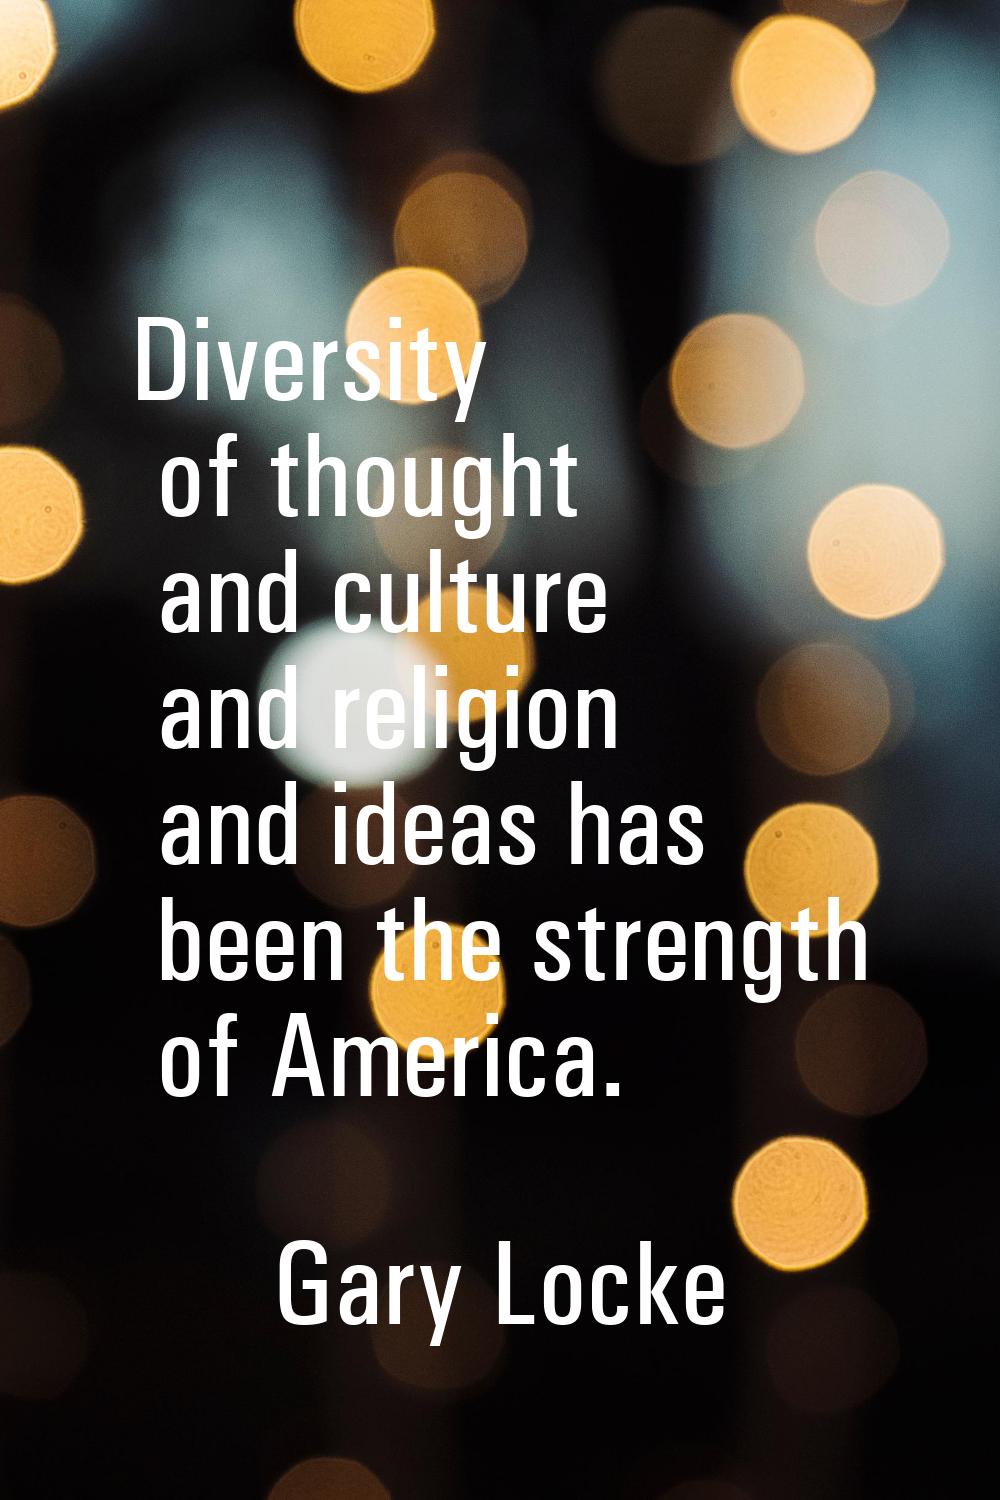 Diversity of thought and culture and religion and ideas has been the strength of America.